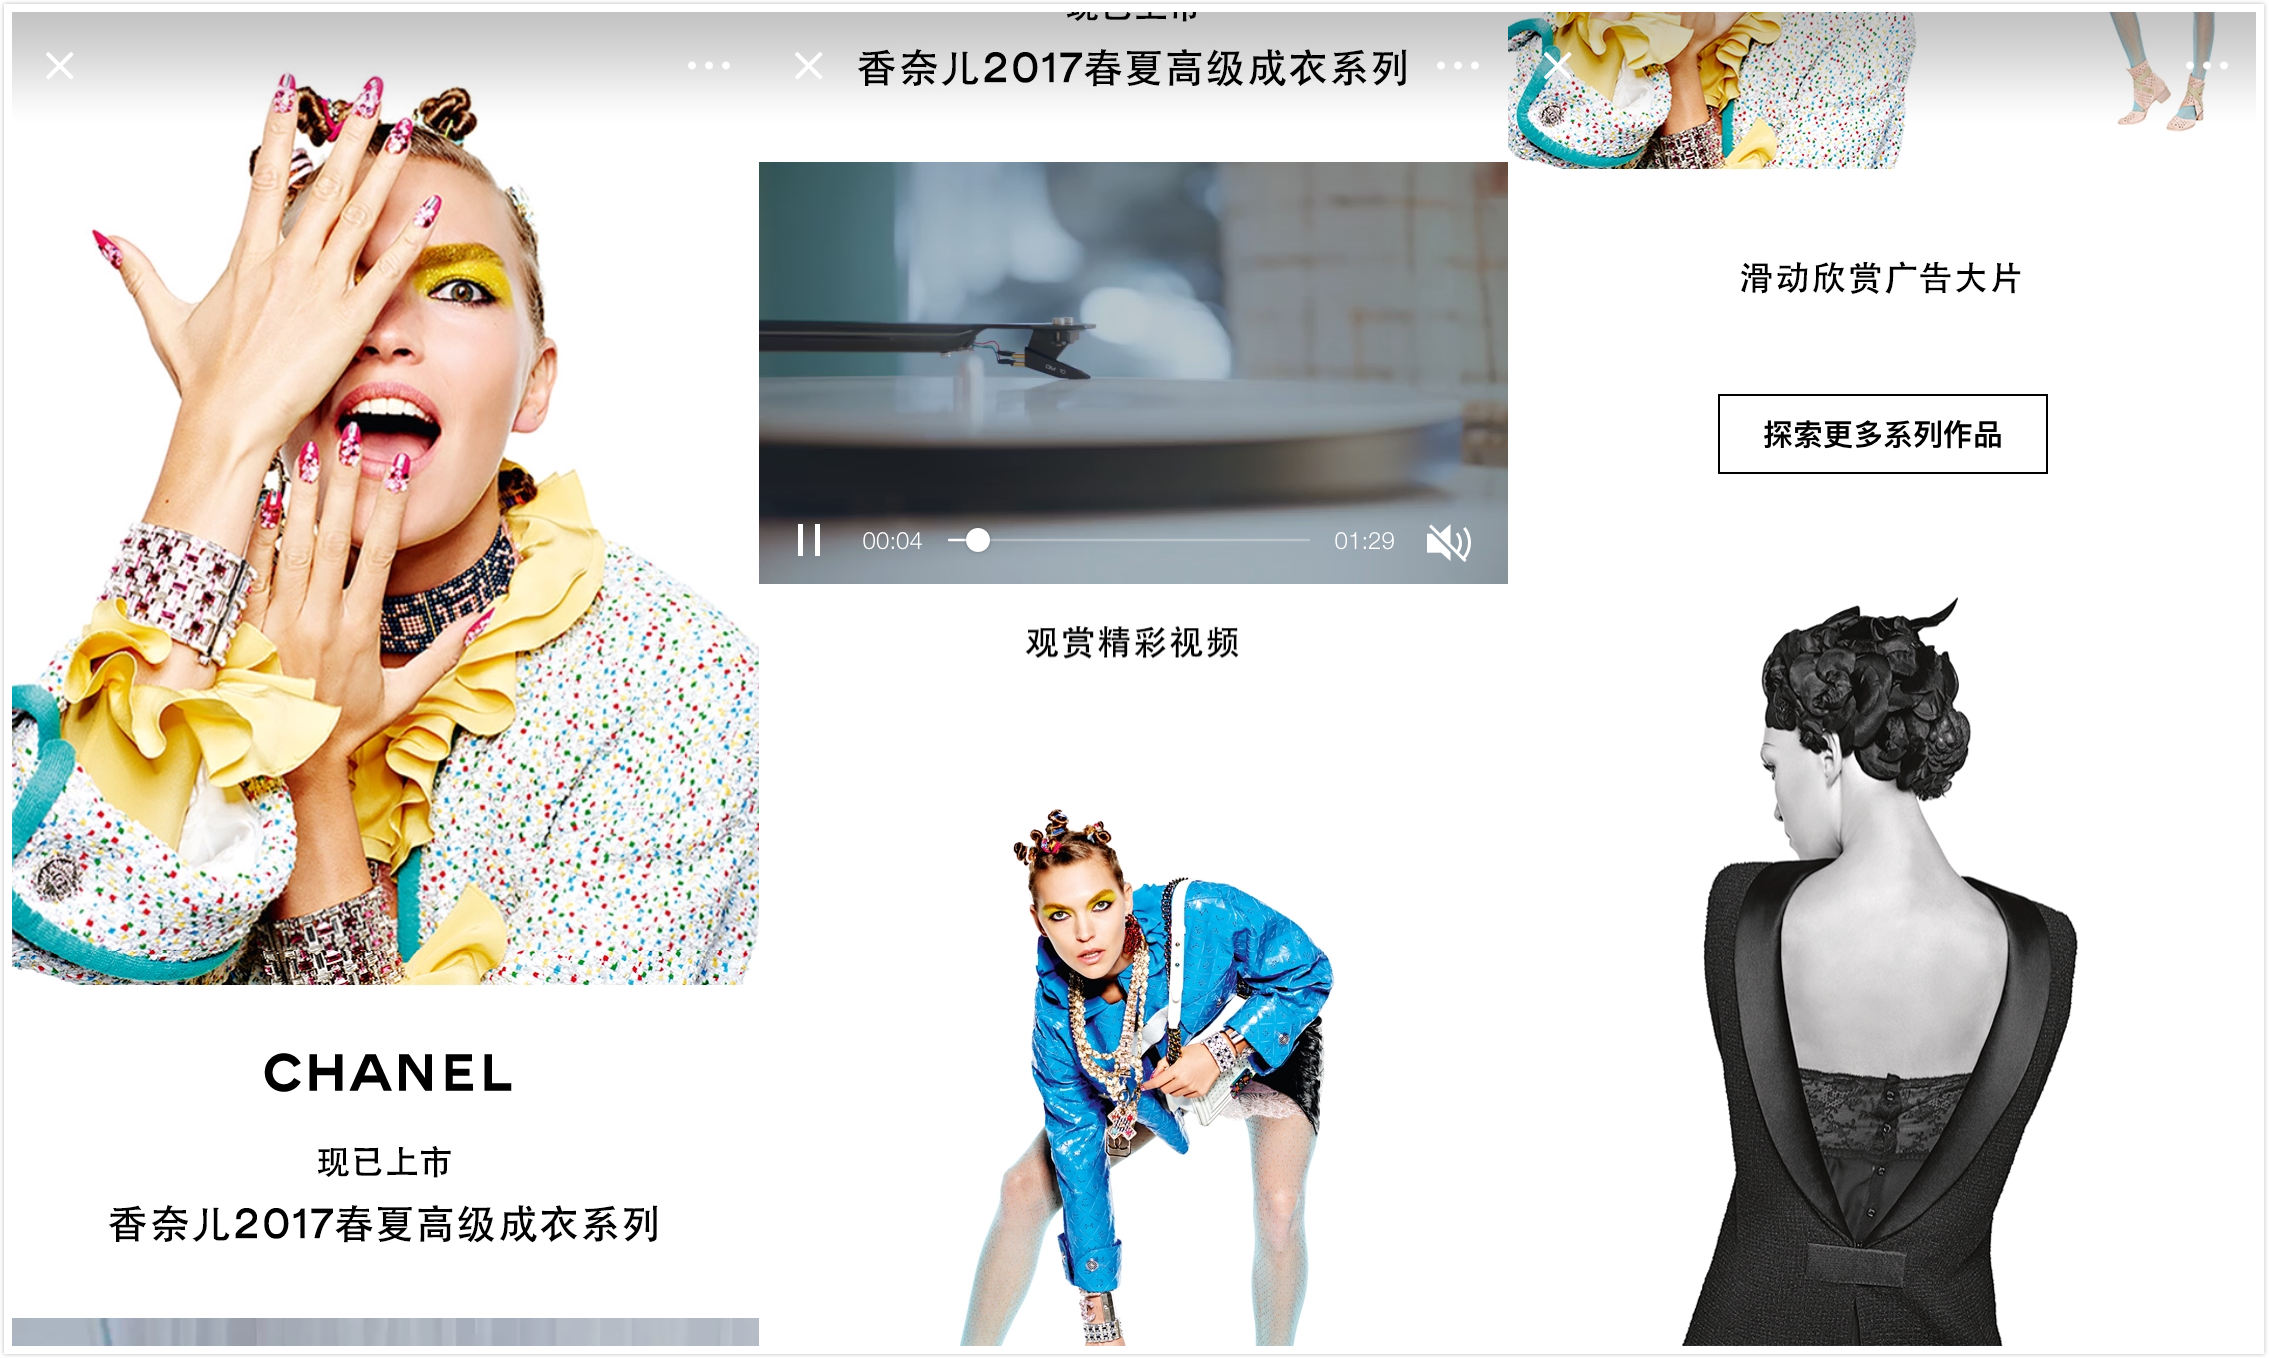 Chanel launches an ad campaign on Moment’s feed after WeChat upgraded the service.